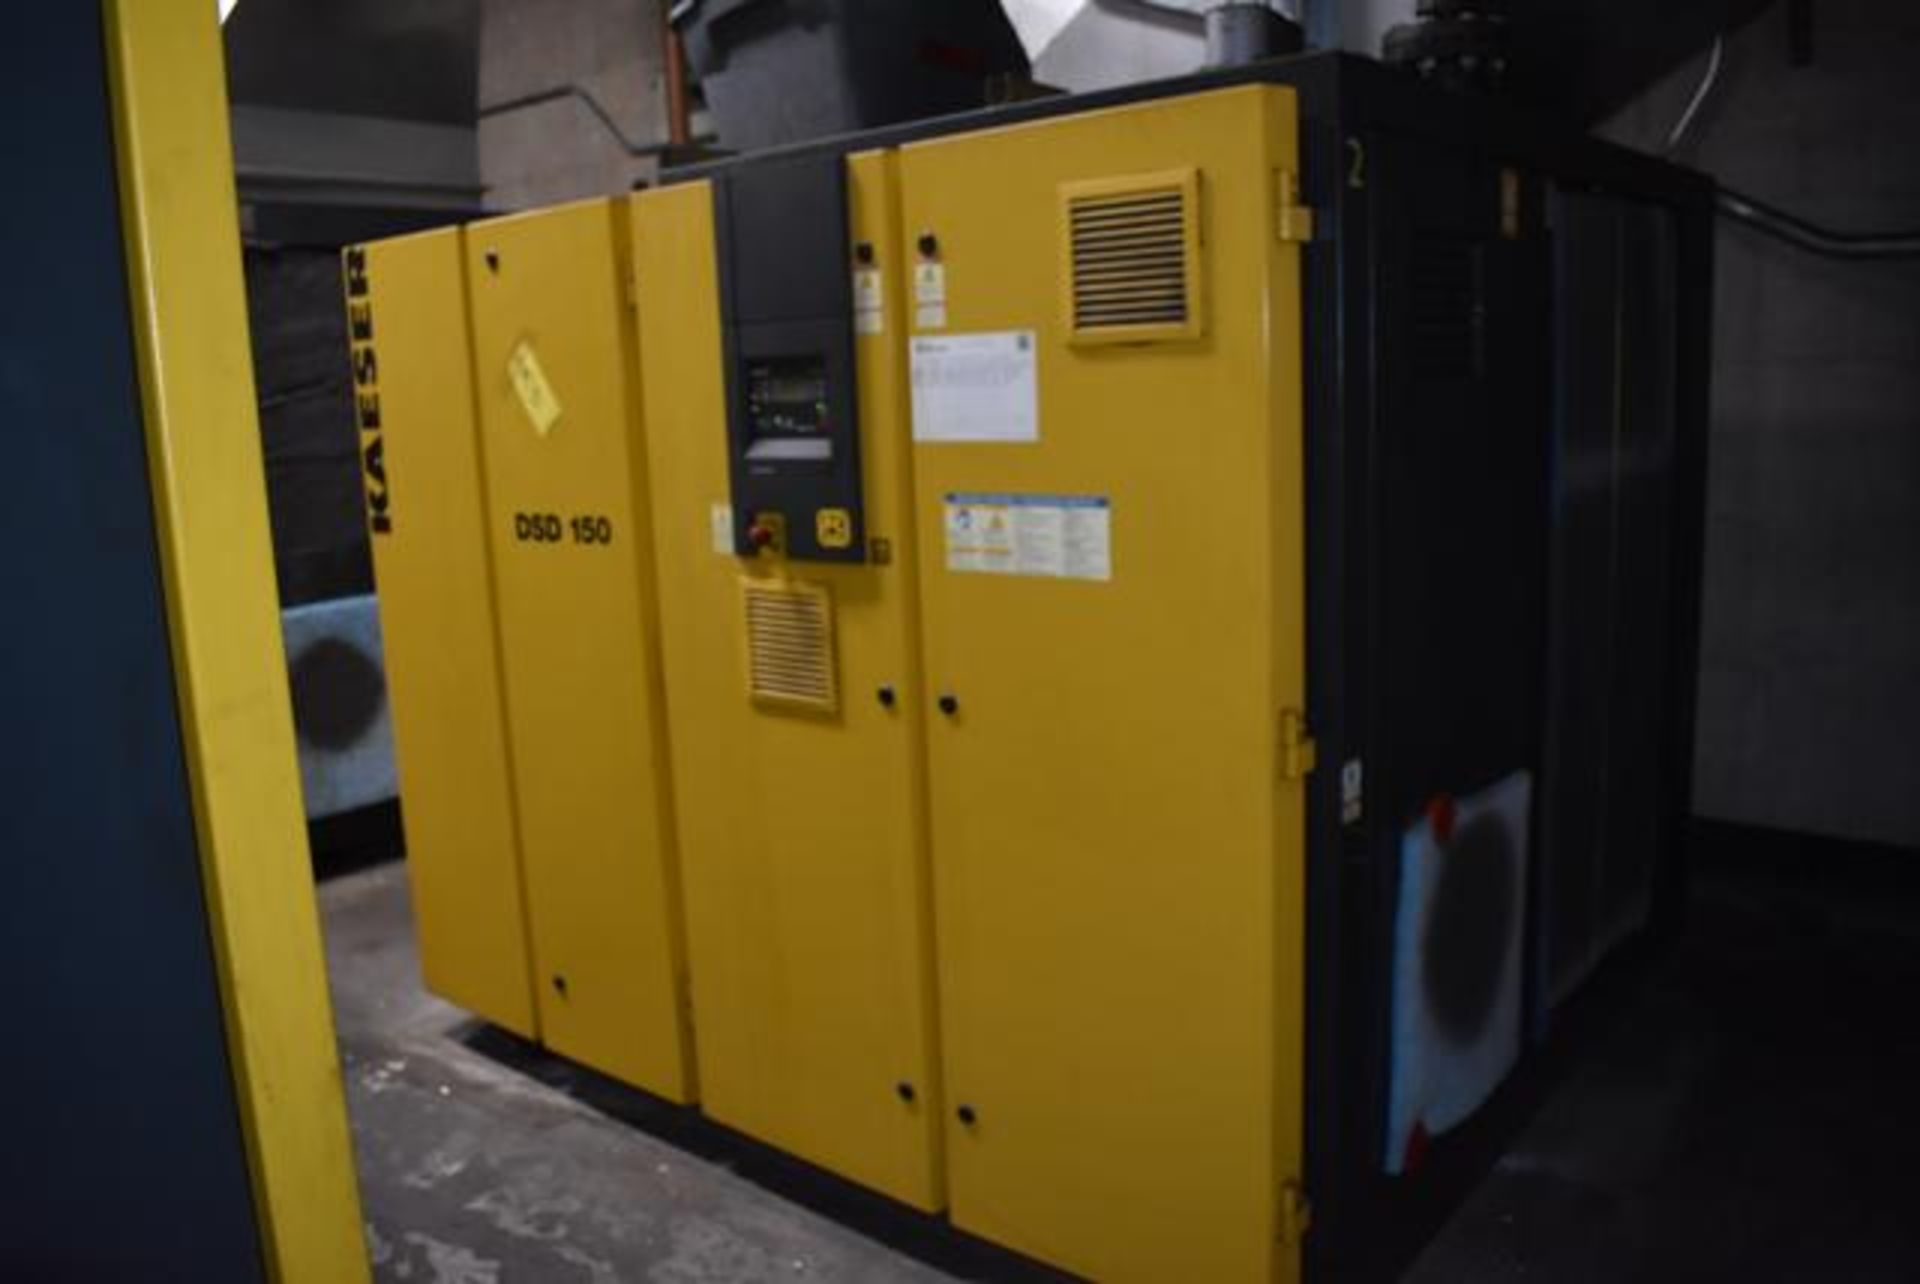 Kaeser DSD-150 Rotary Screw Air Compressor, 150 HP (Hrs. N/A) - Image 2 of 3